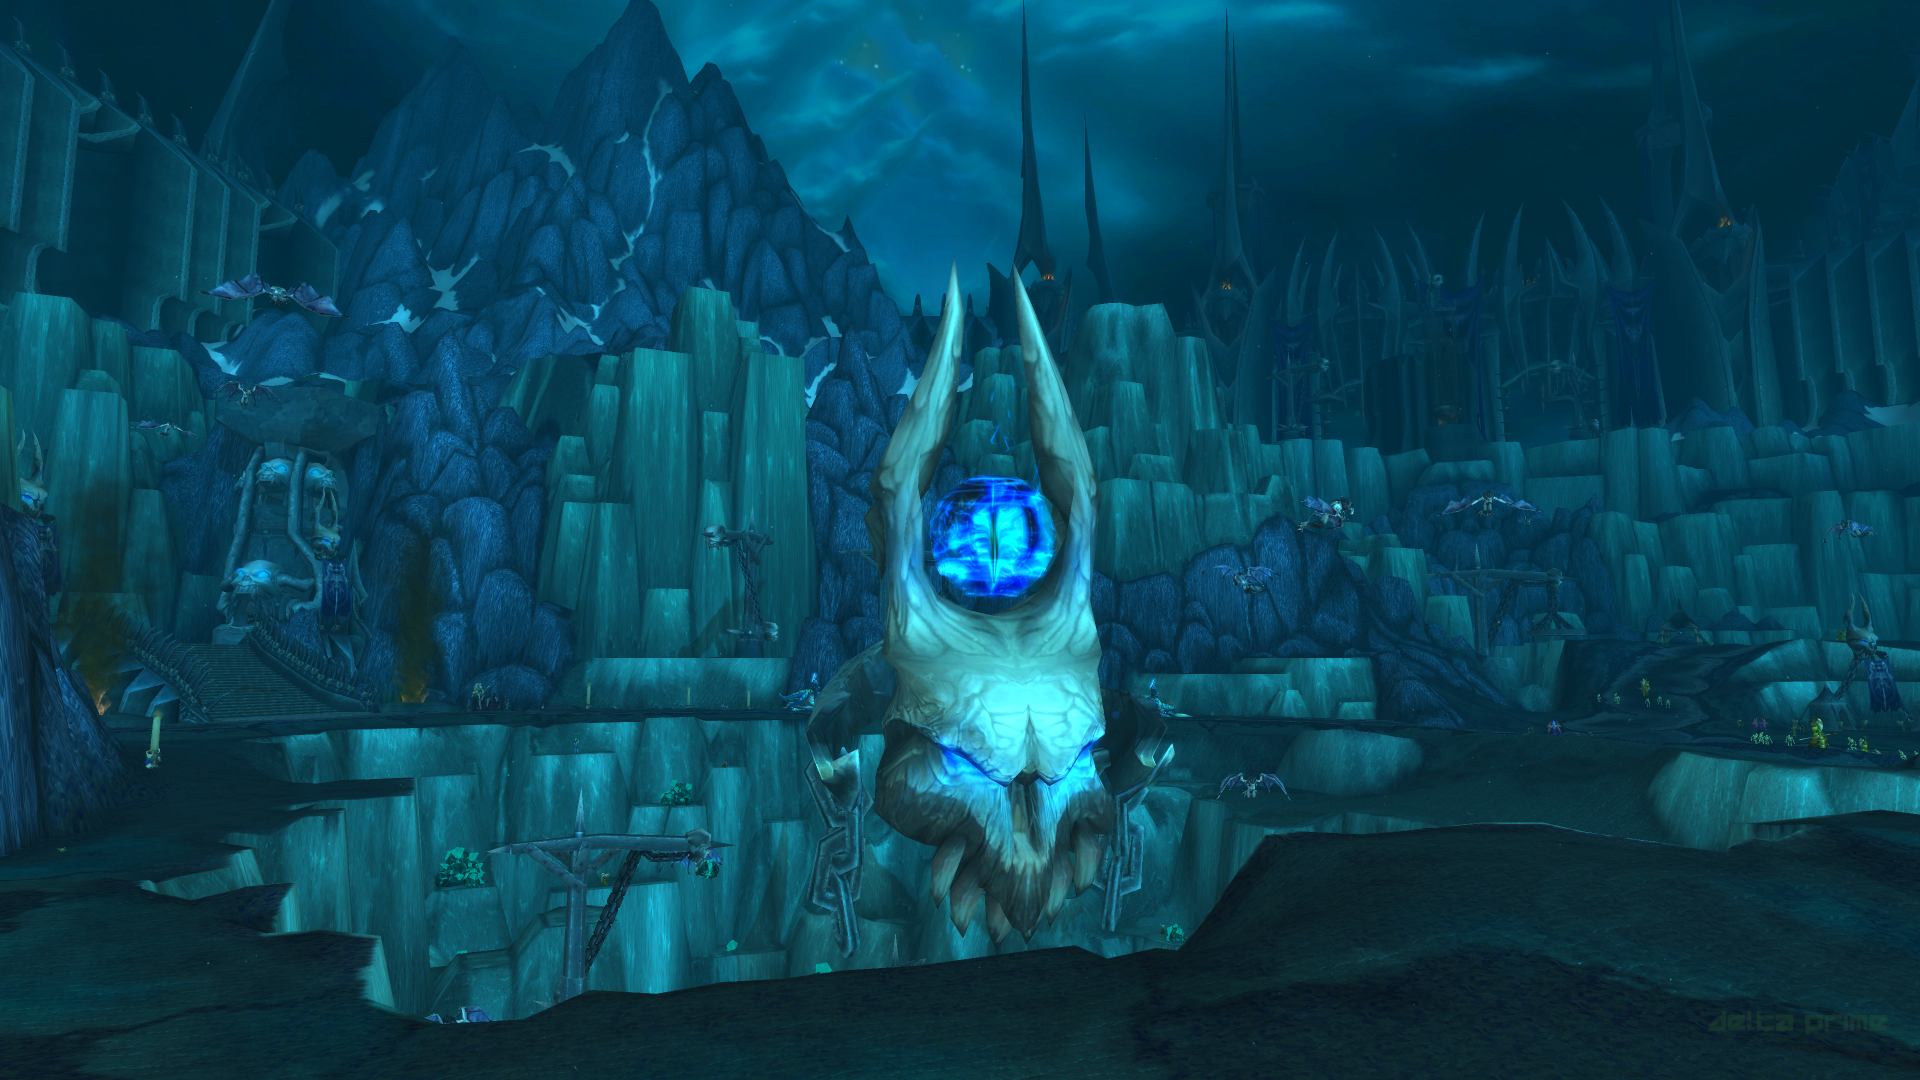 World Of Warcraft World Of Warcraft Wrath Of The Lich King Pit Of Saron Saronite Icecrown Citadel Th 1920x1080